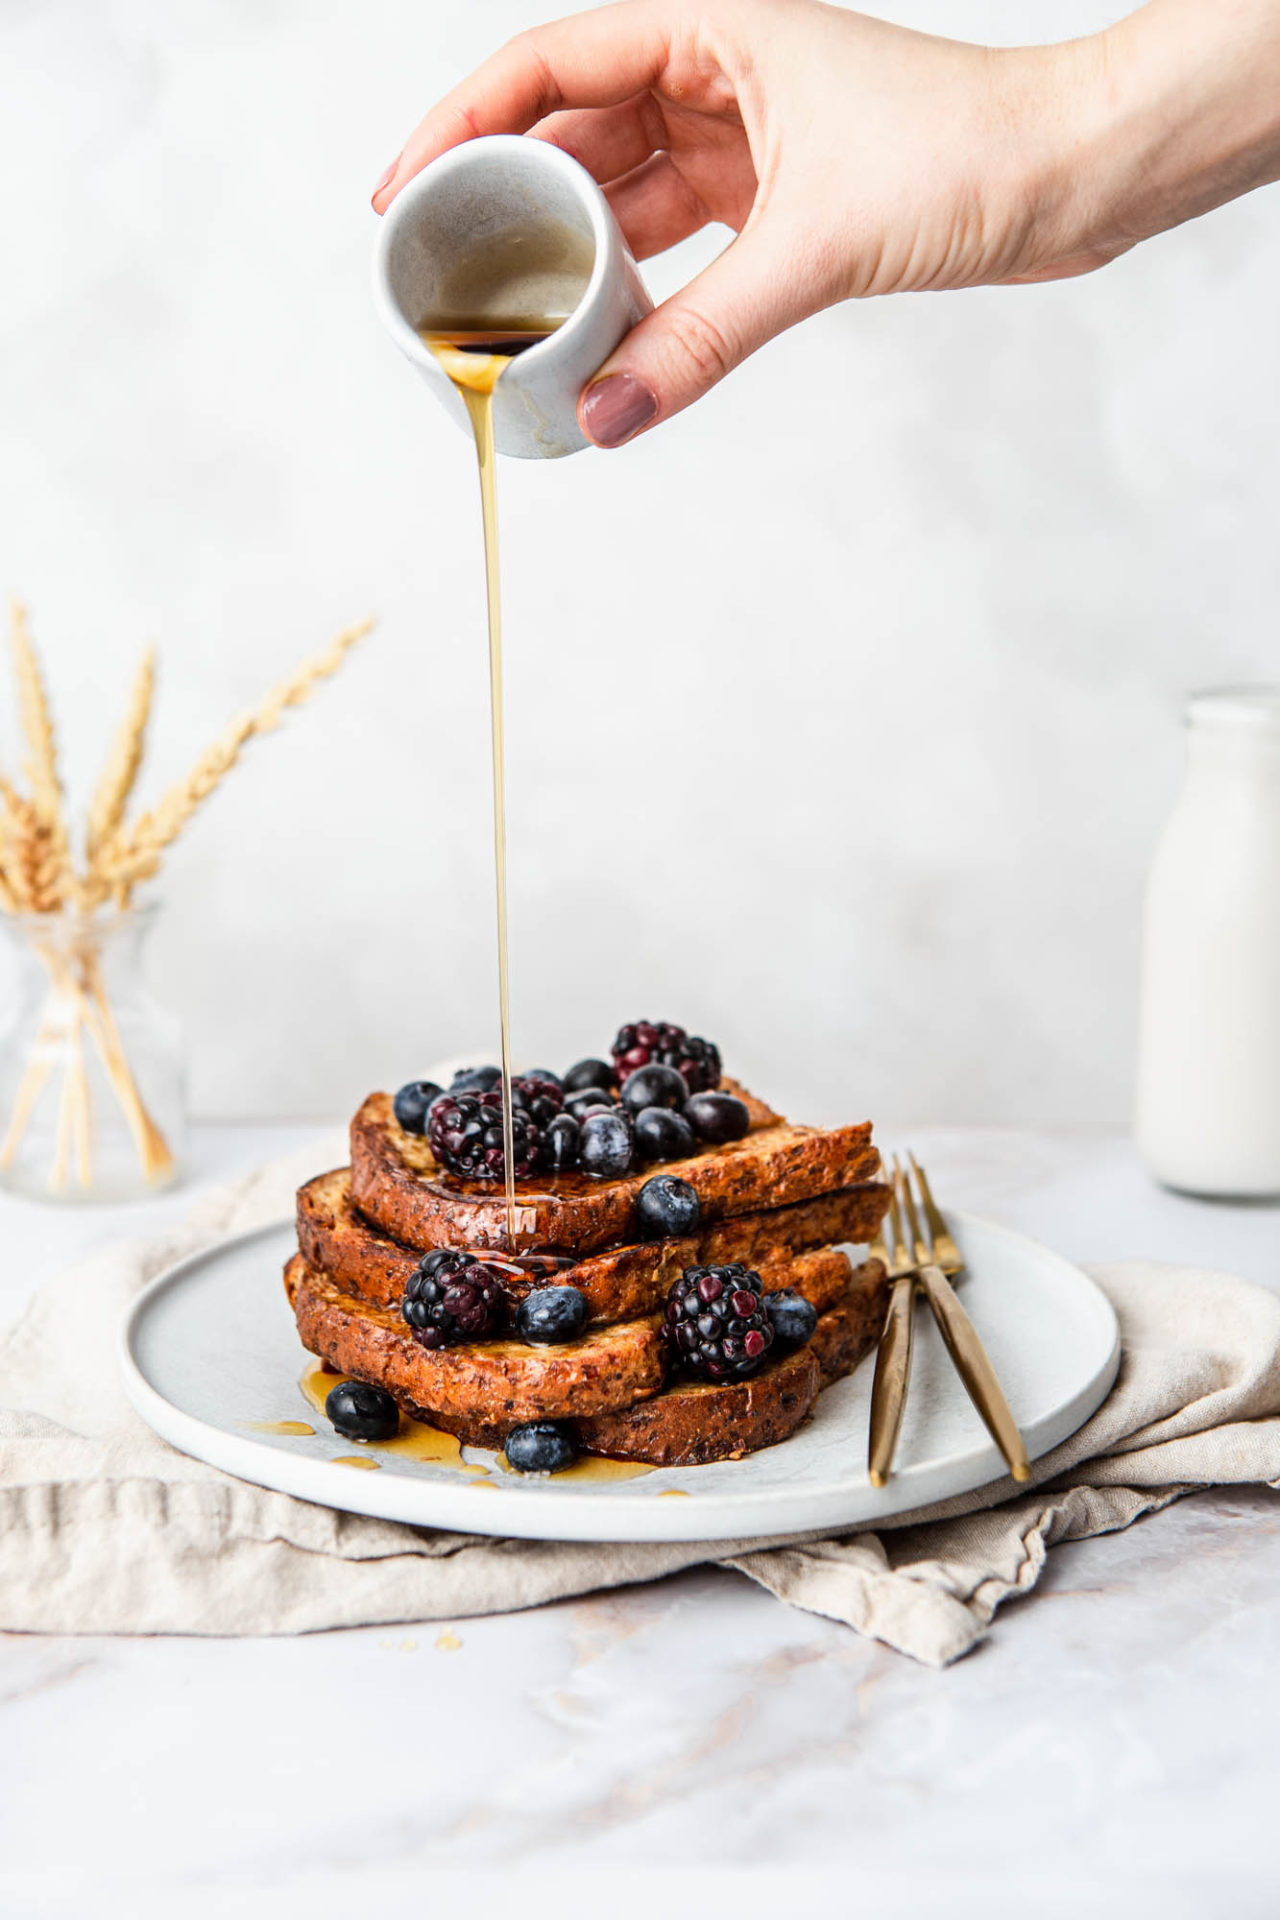 Healthy Whole Wheat French Toast pour shot photography